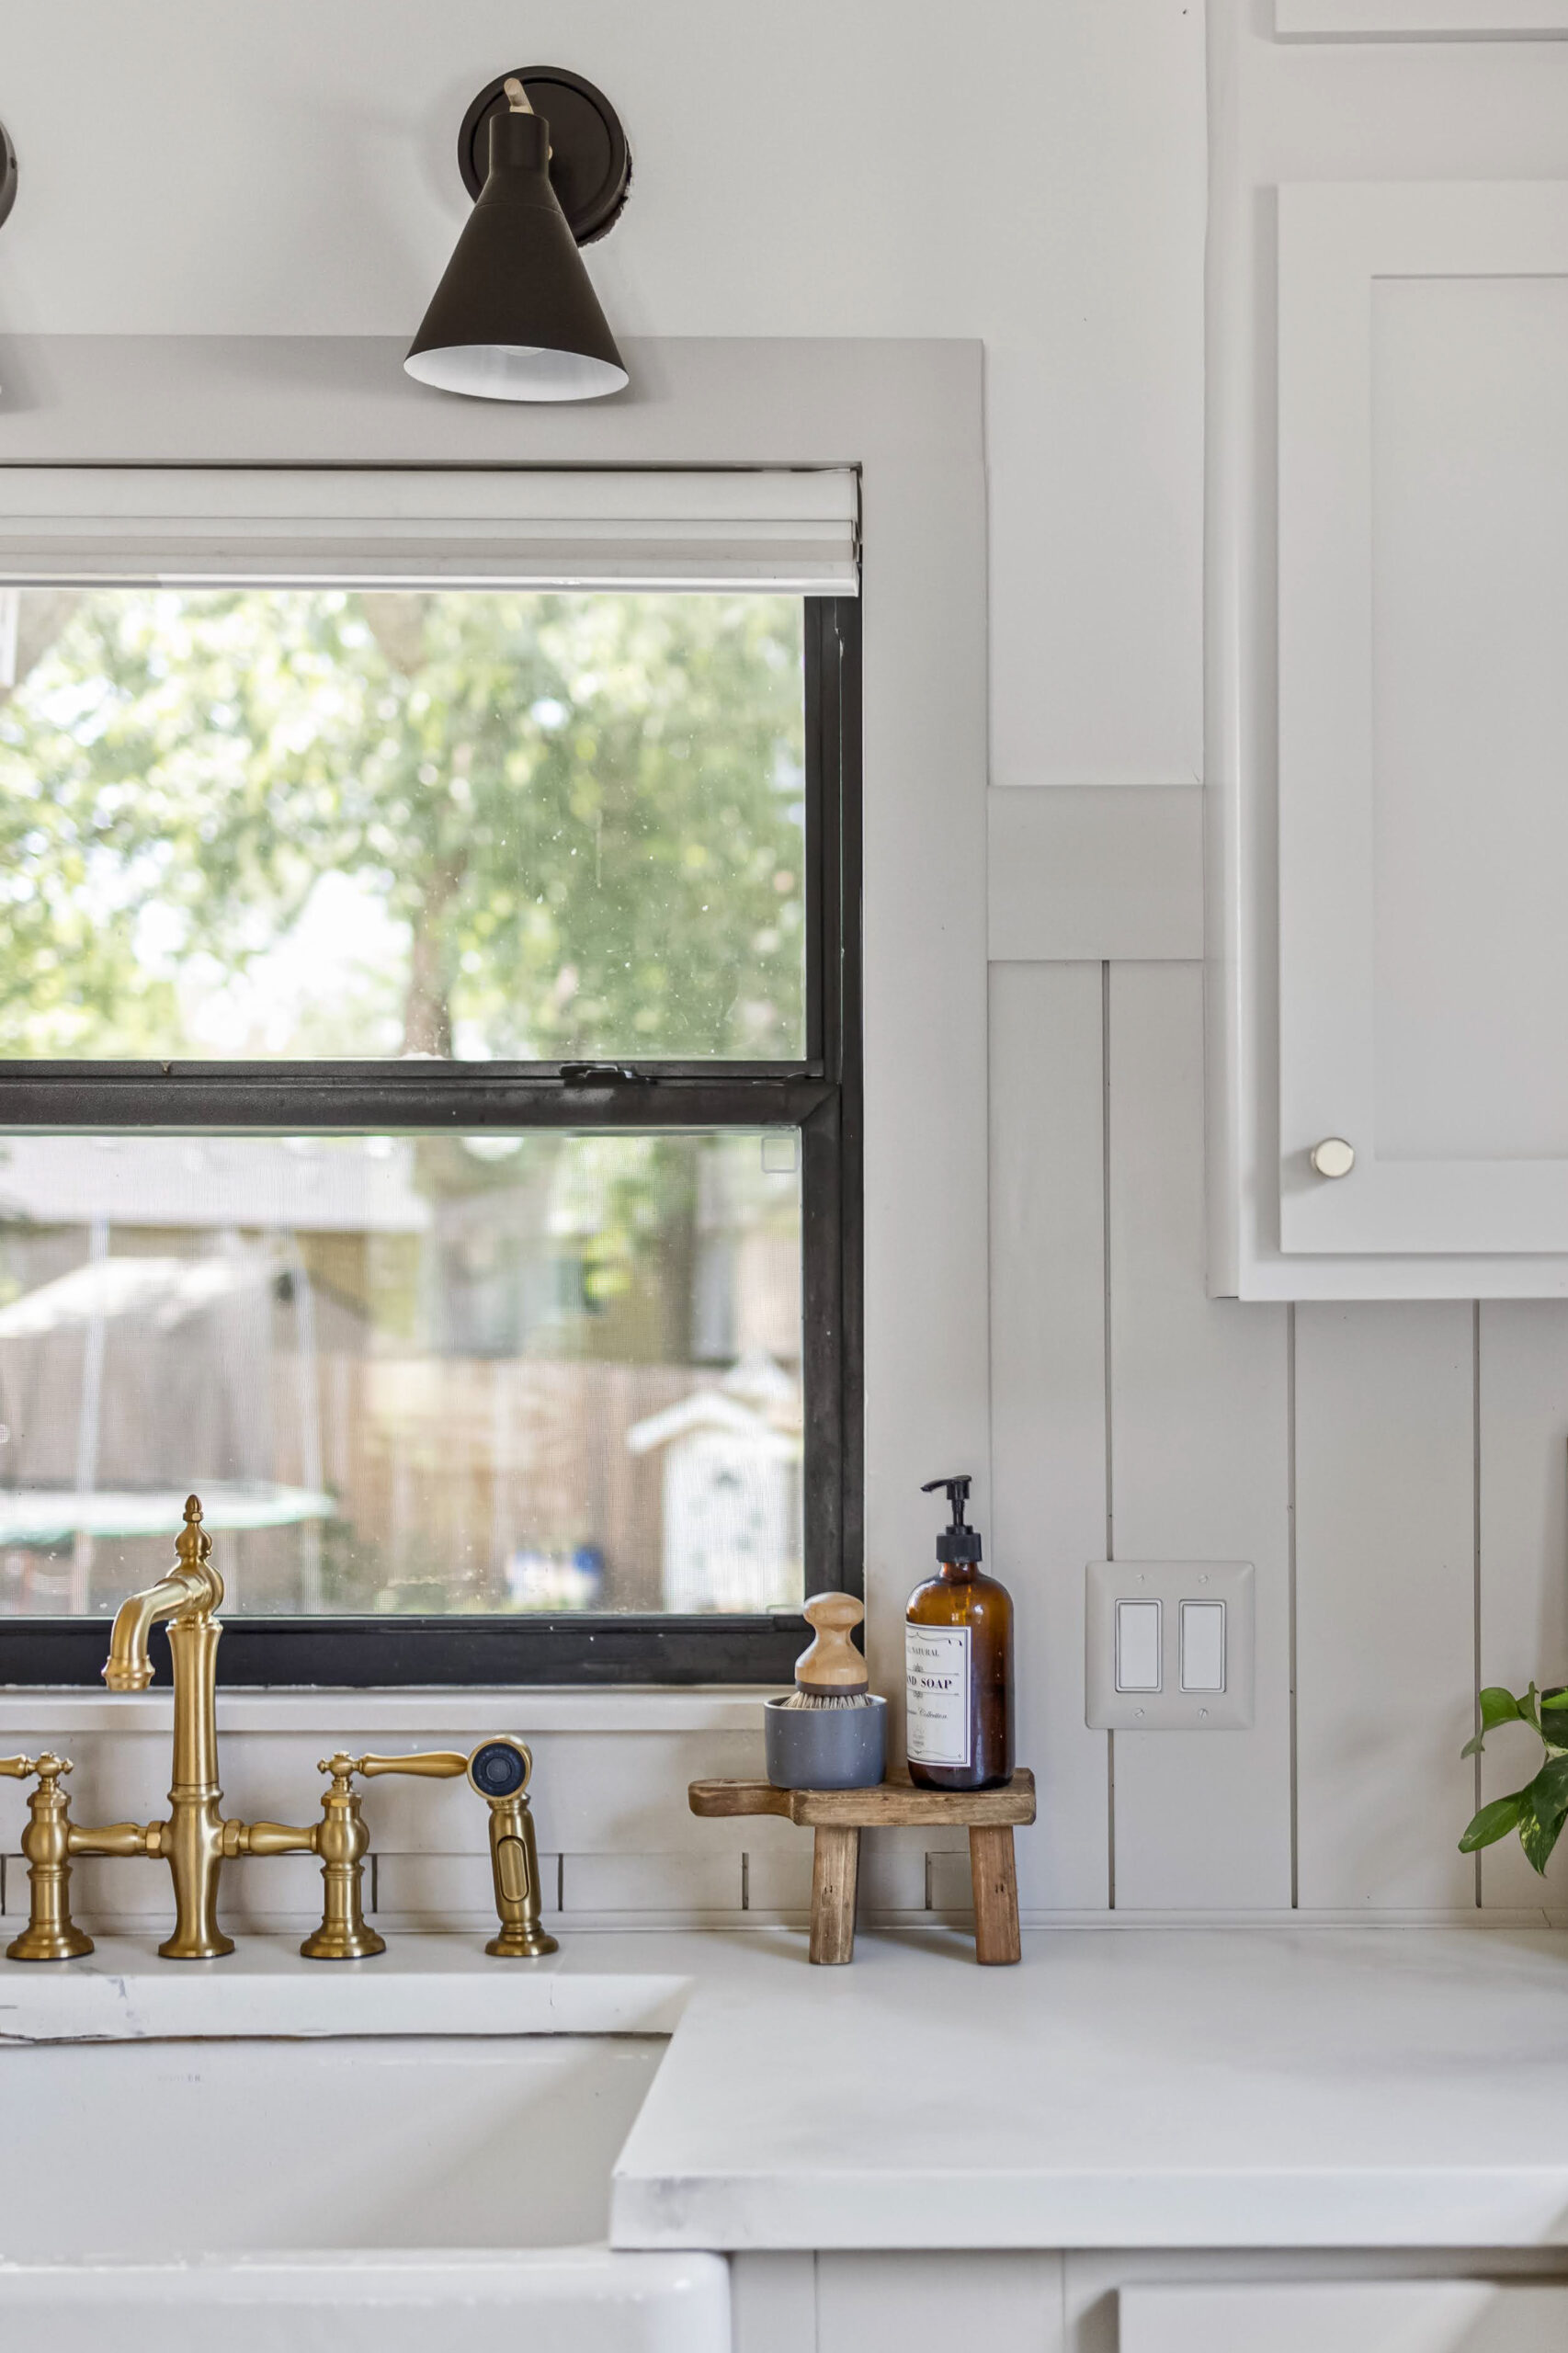 Windows painted black in a gorgeous, fully renovated kitchen.